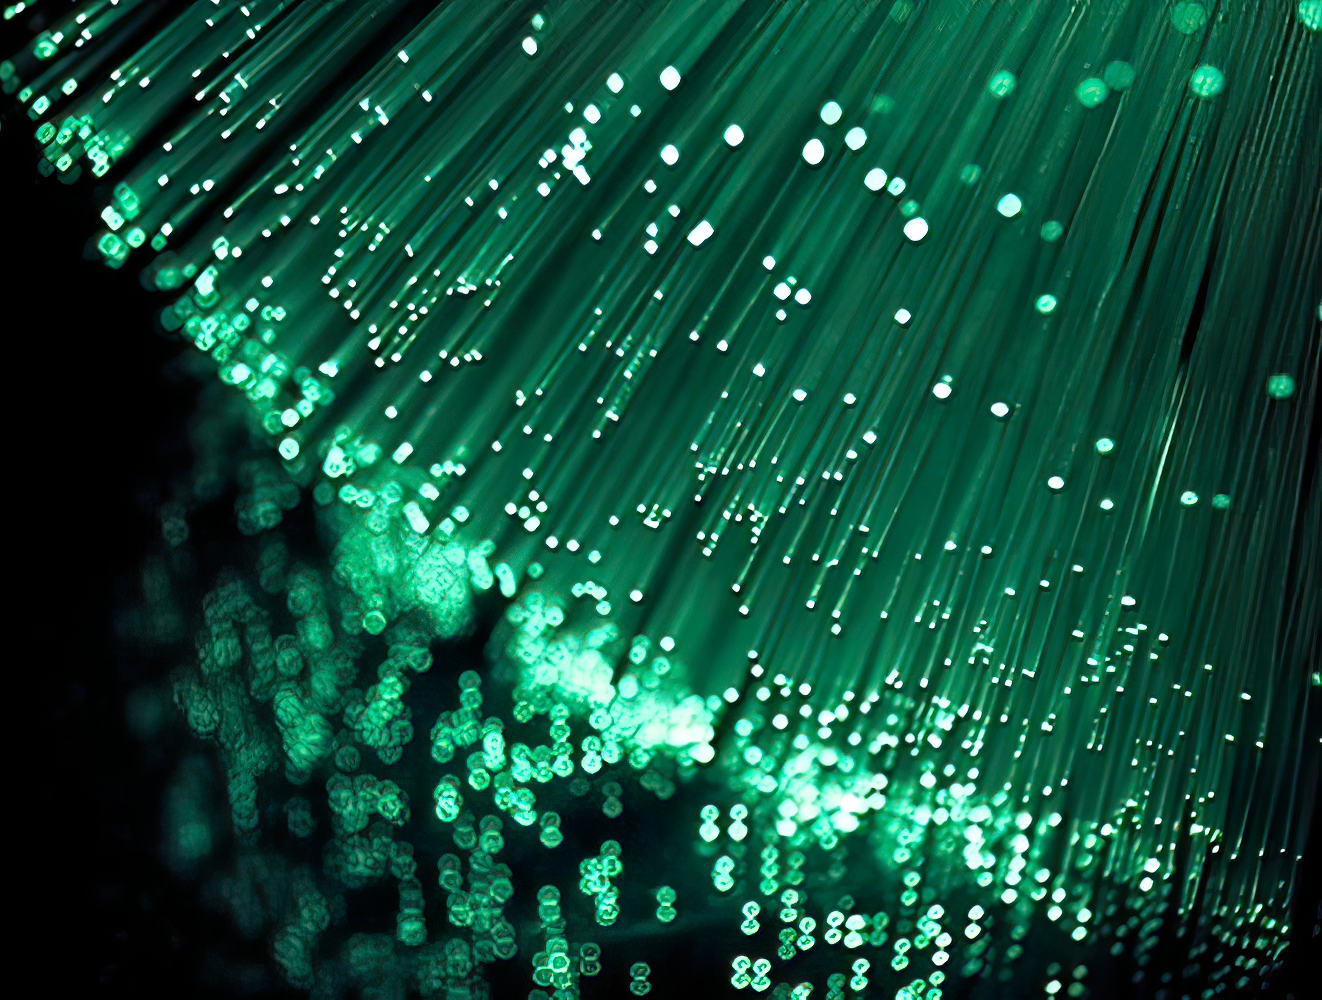 fibre optic green cables from top right